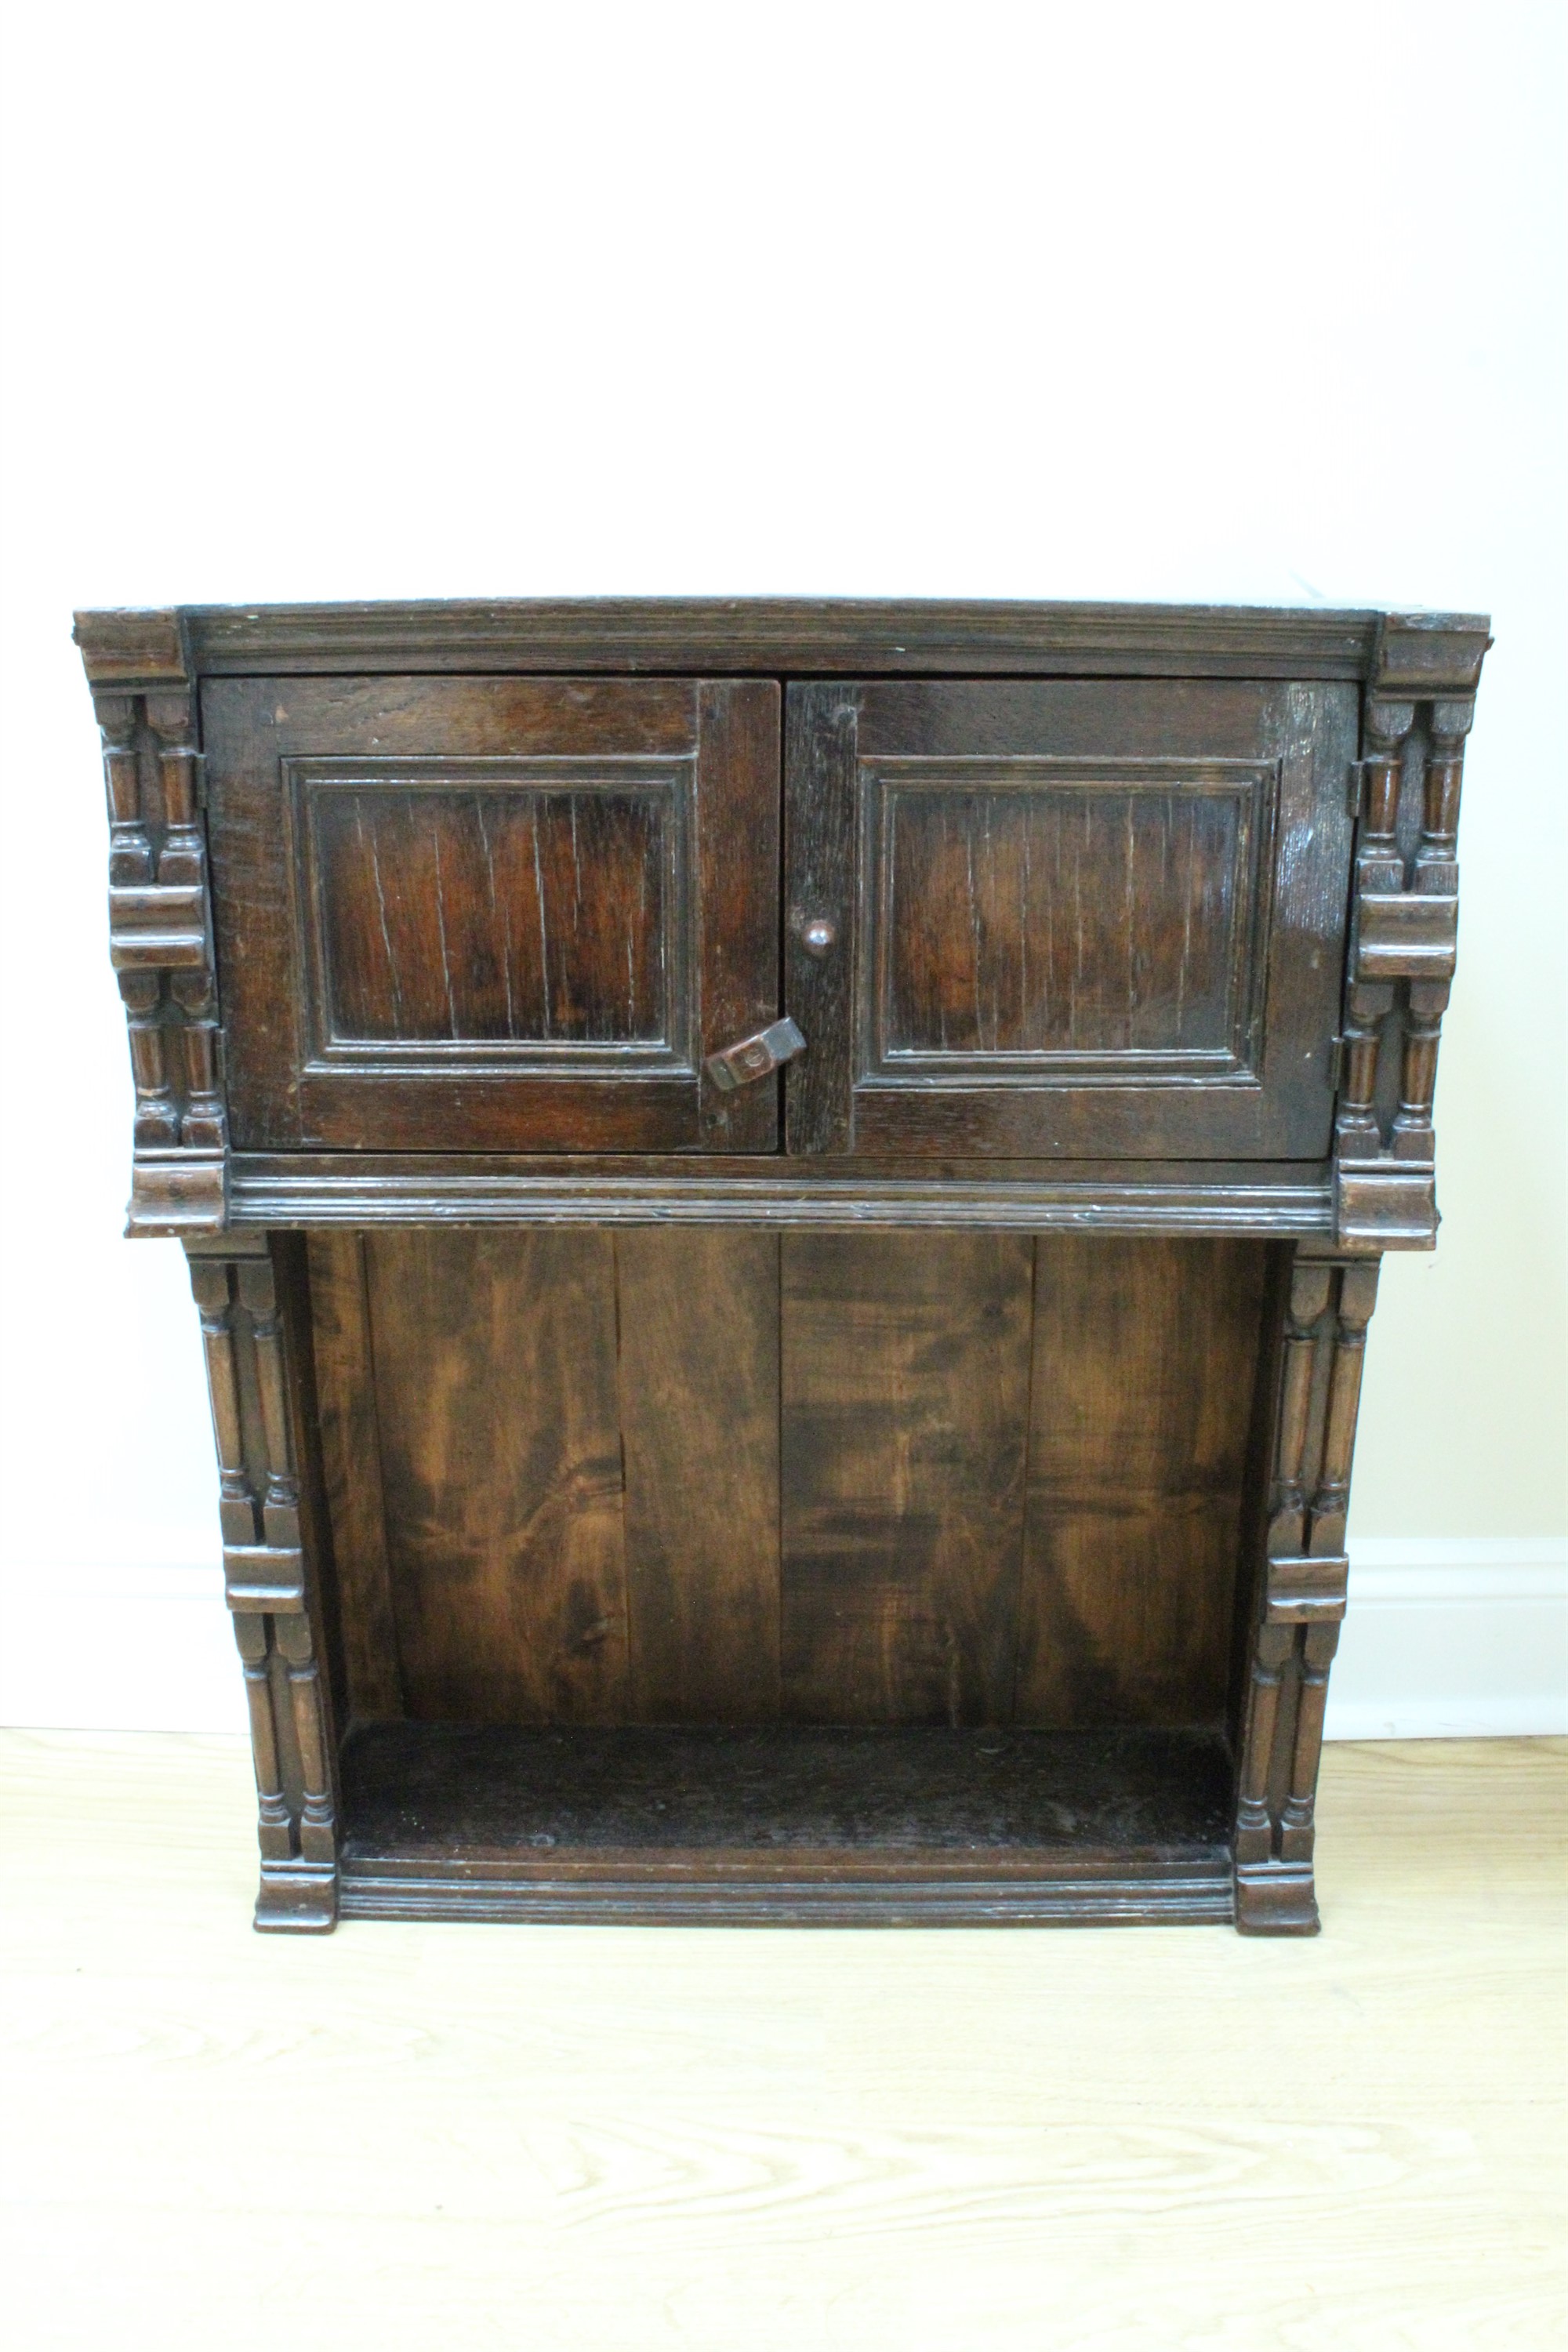 A small oak cabinet, incorporating early elements